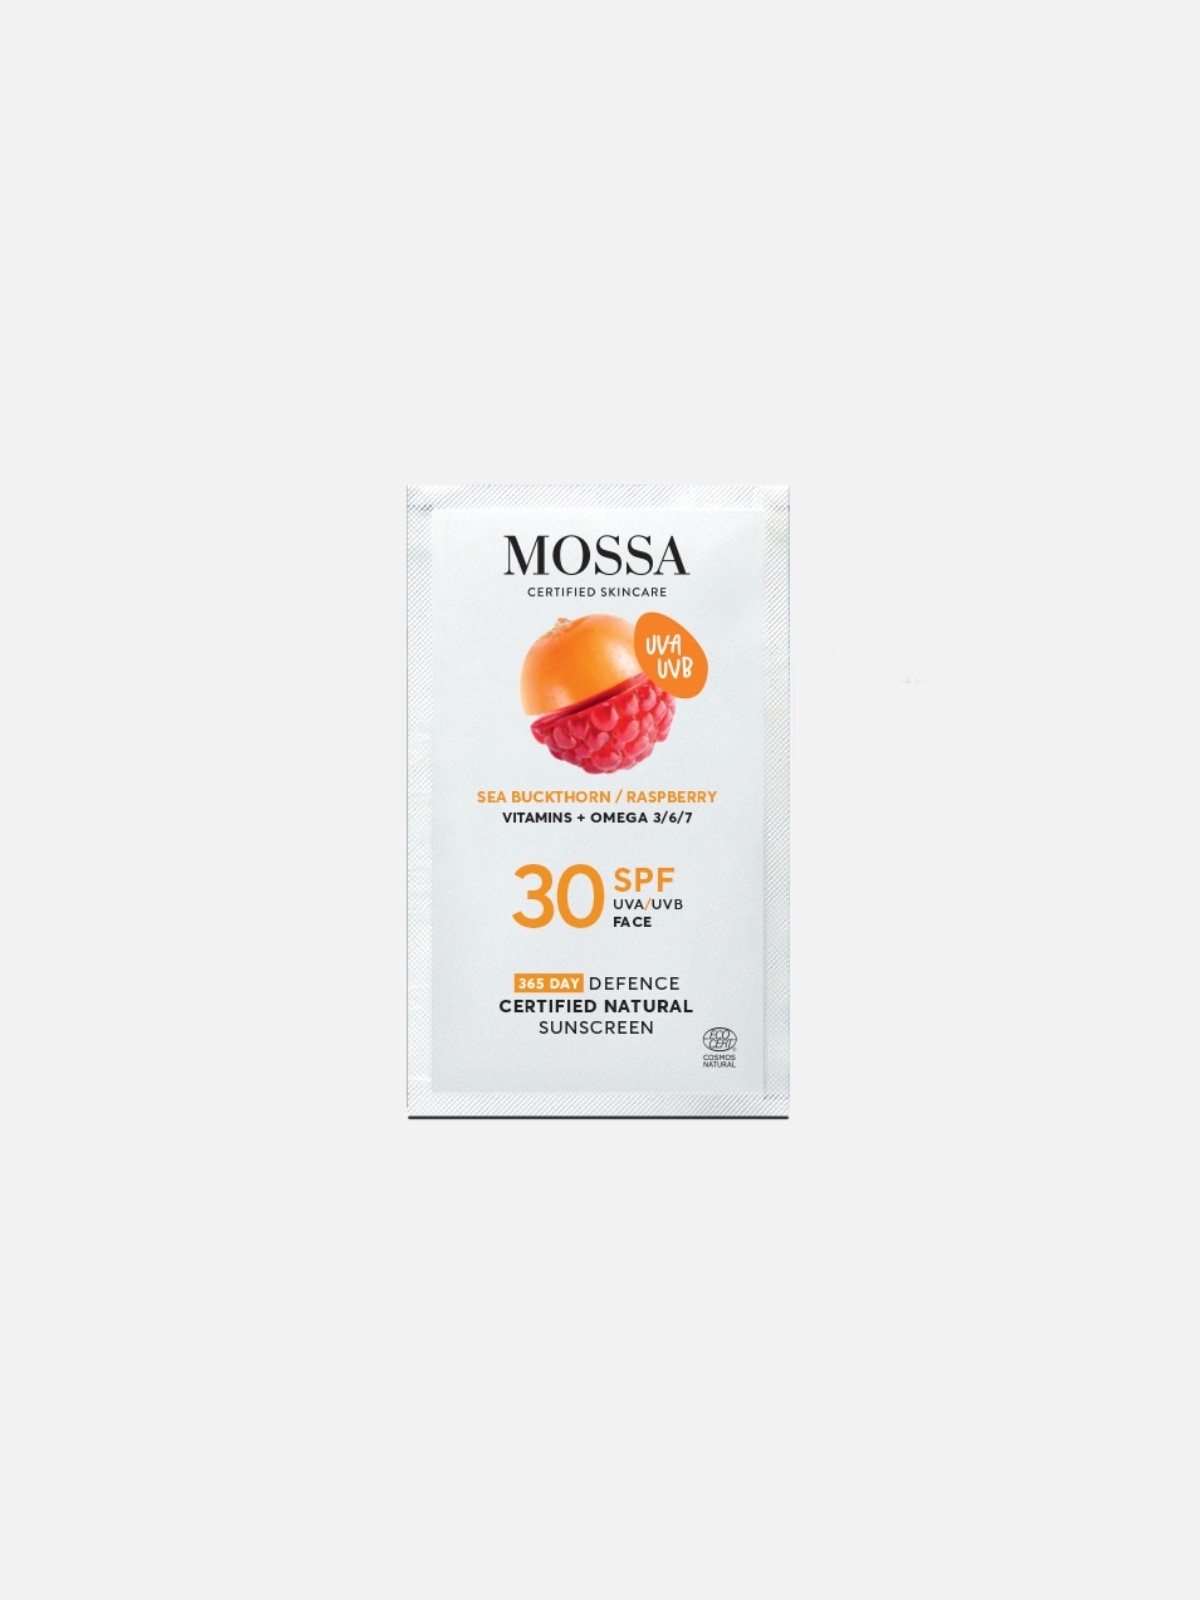 - 365 Day Defence Certified Natural Sunscreen -